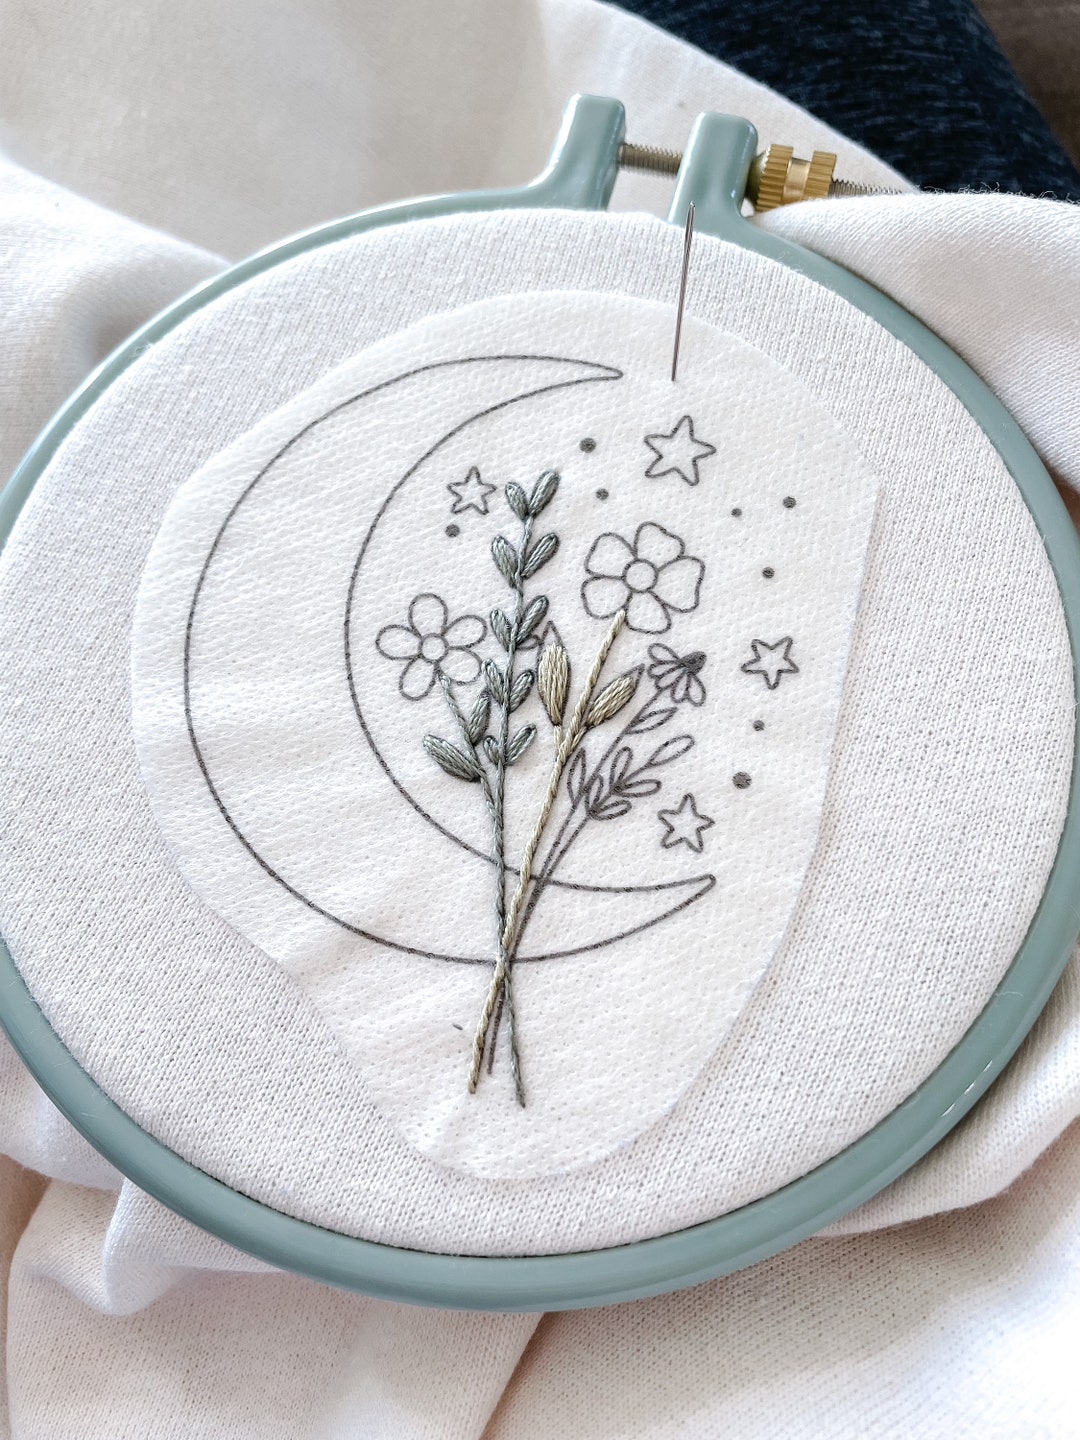 Is anyone else working on an embroidery journal? I've been having a lot of  fun trying to keep up with stitching an icon a day. : r/Embroidery